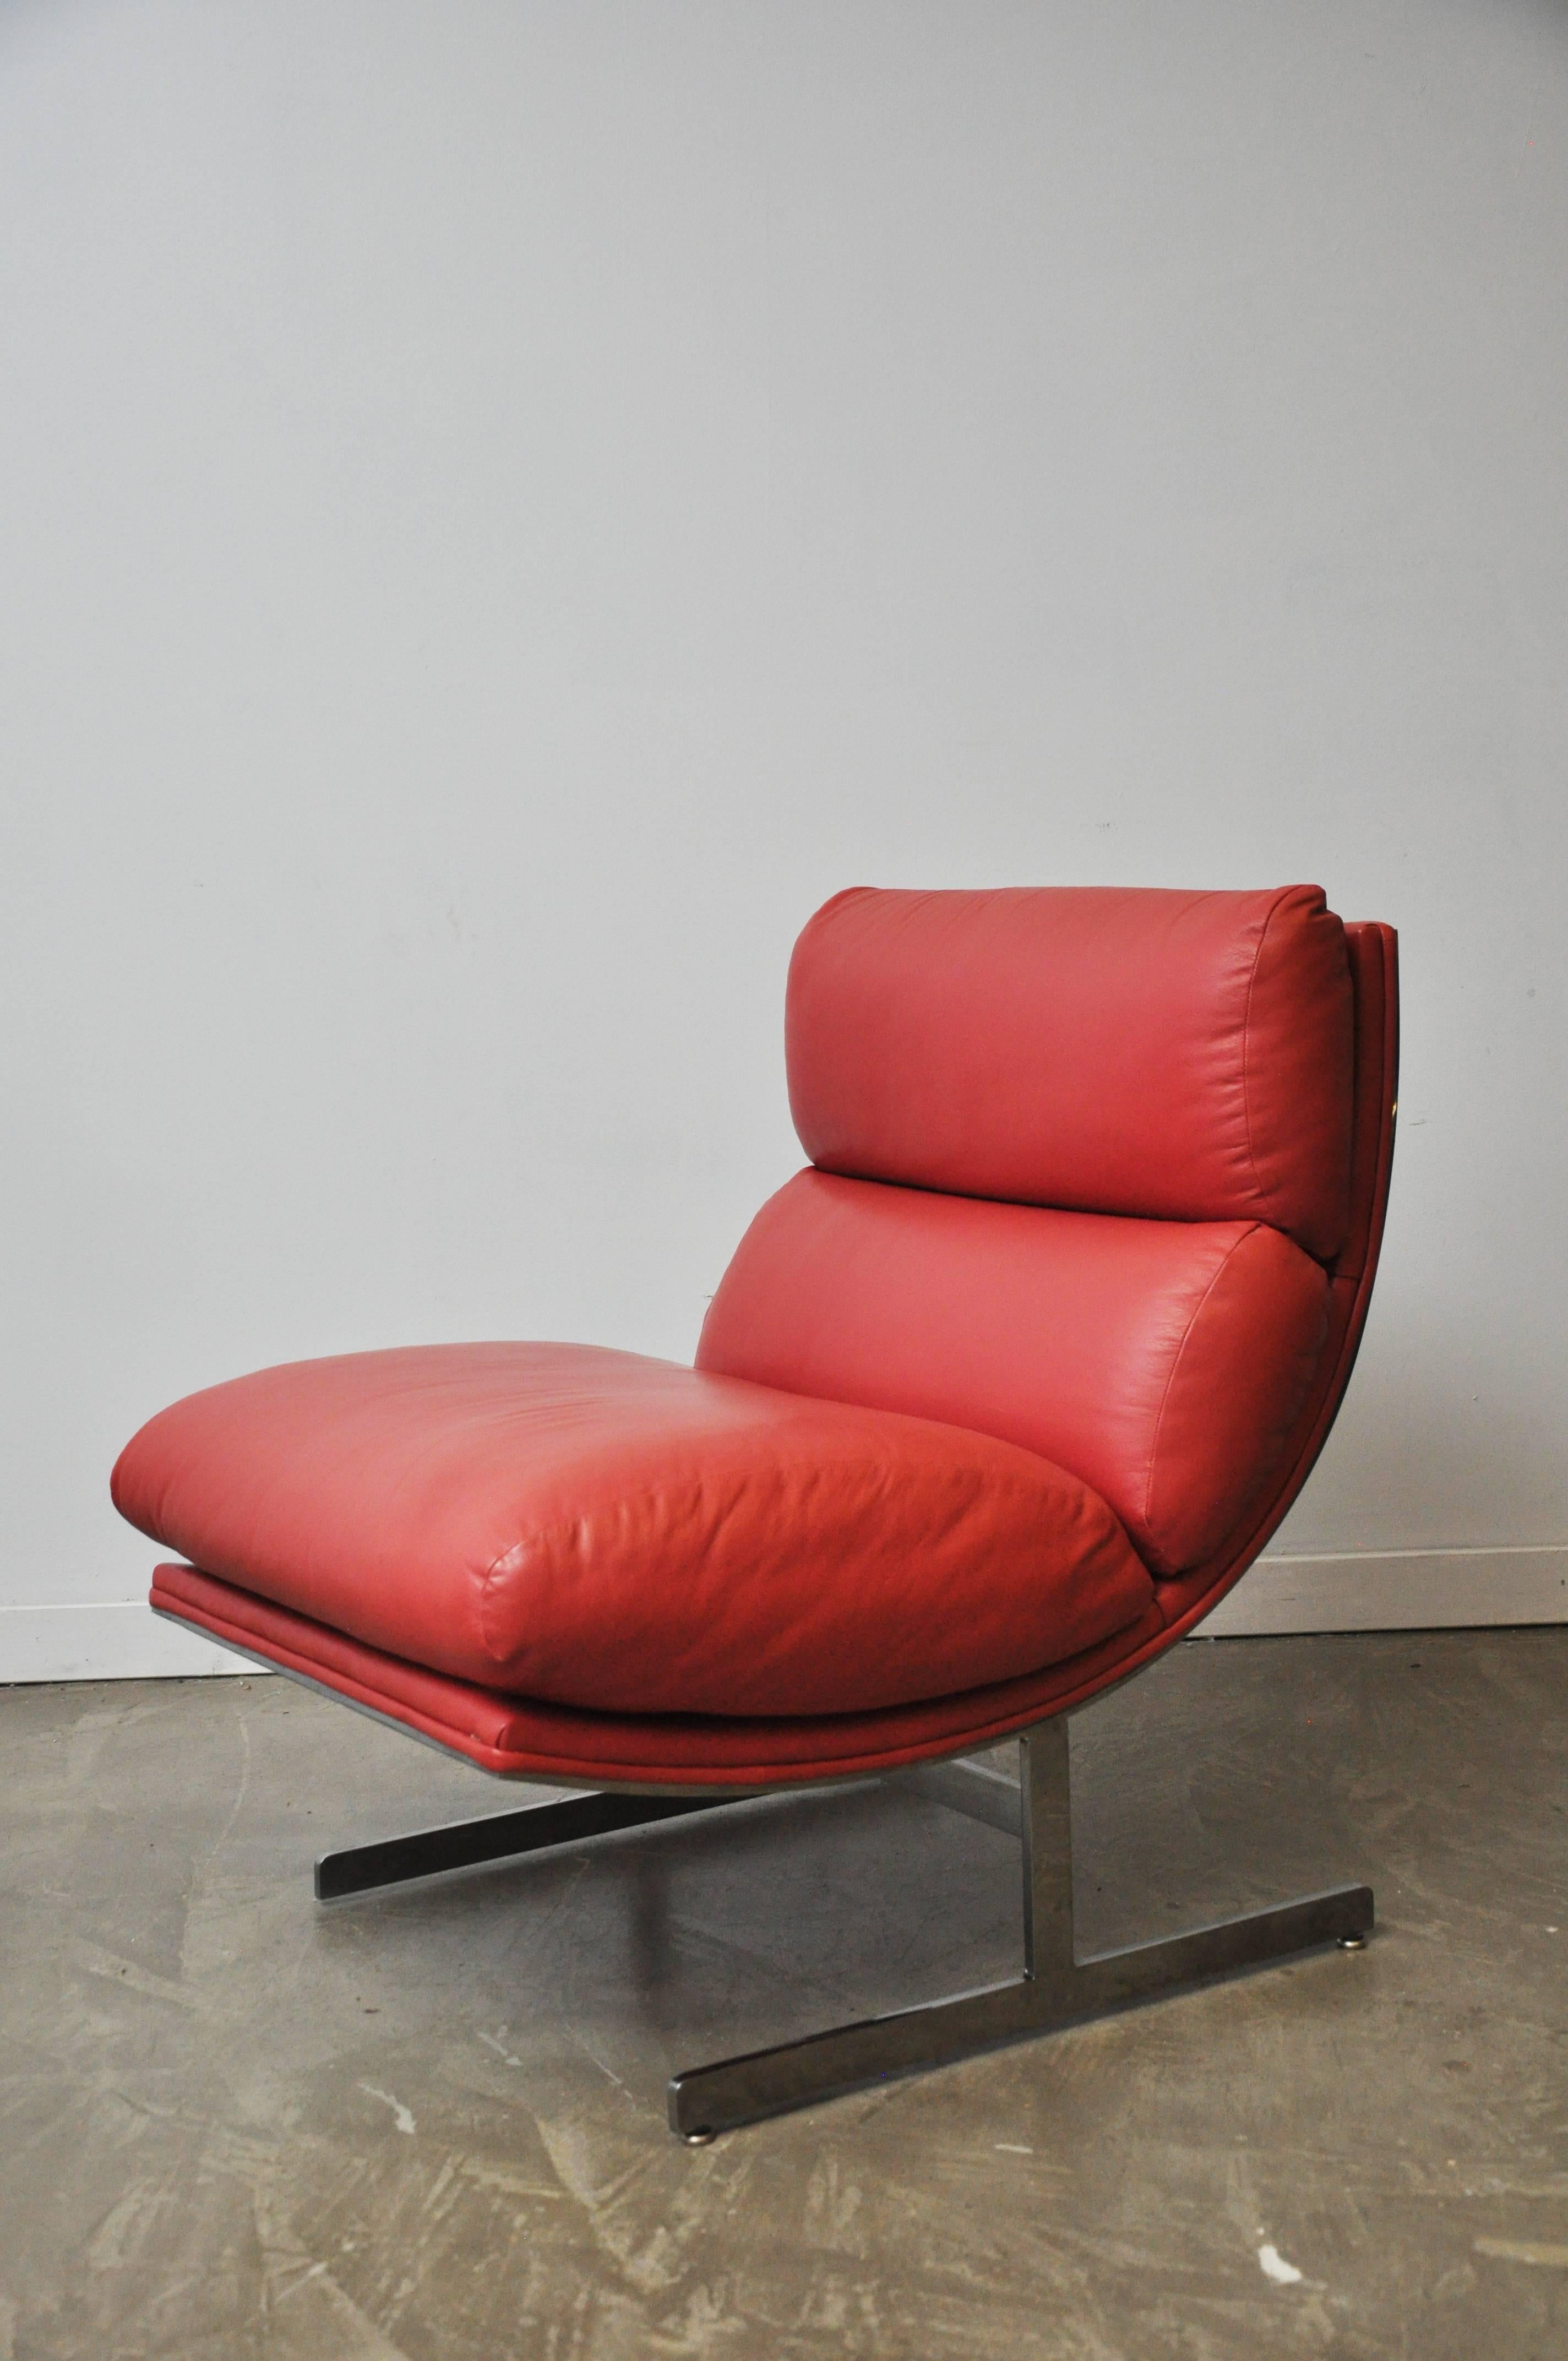 We are proud to offer this Arc II chair by Kipp Stewart for Directional. Polished chrome frame with original red/coral leather.